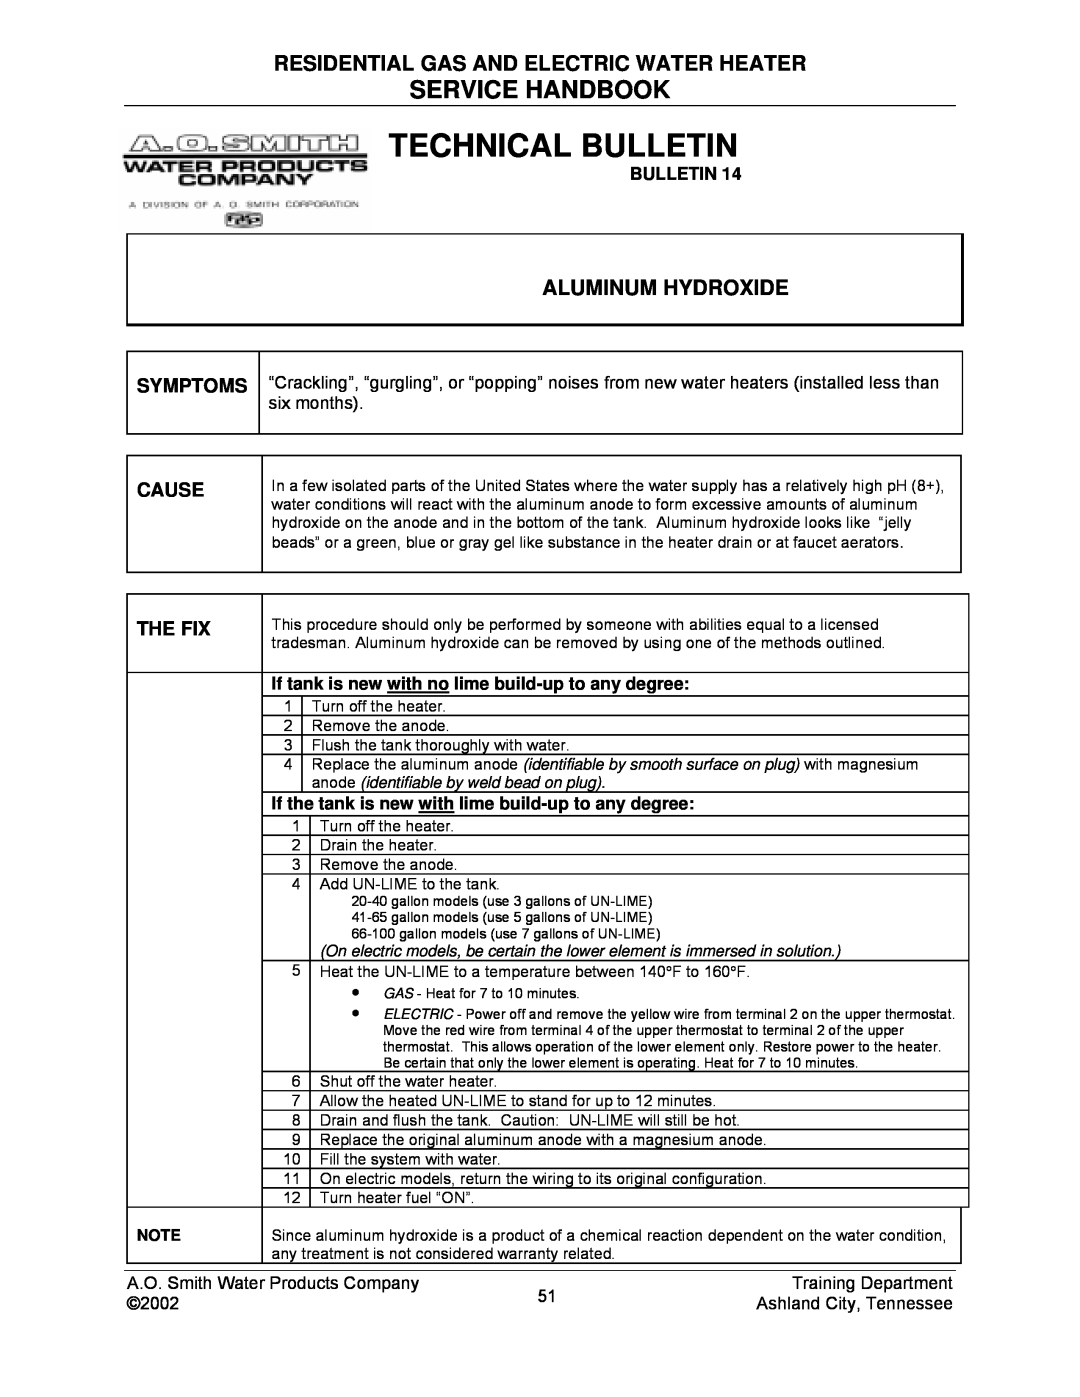 A.O. Smith TC-049-R2 Technical Bulletin, Service Handbook, Residential Gas And Electric Water Heater, Aluminum Hydroxide 